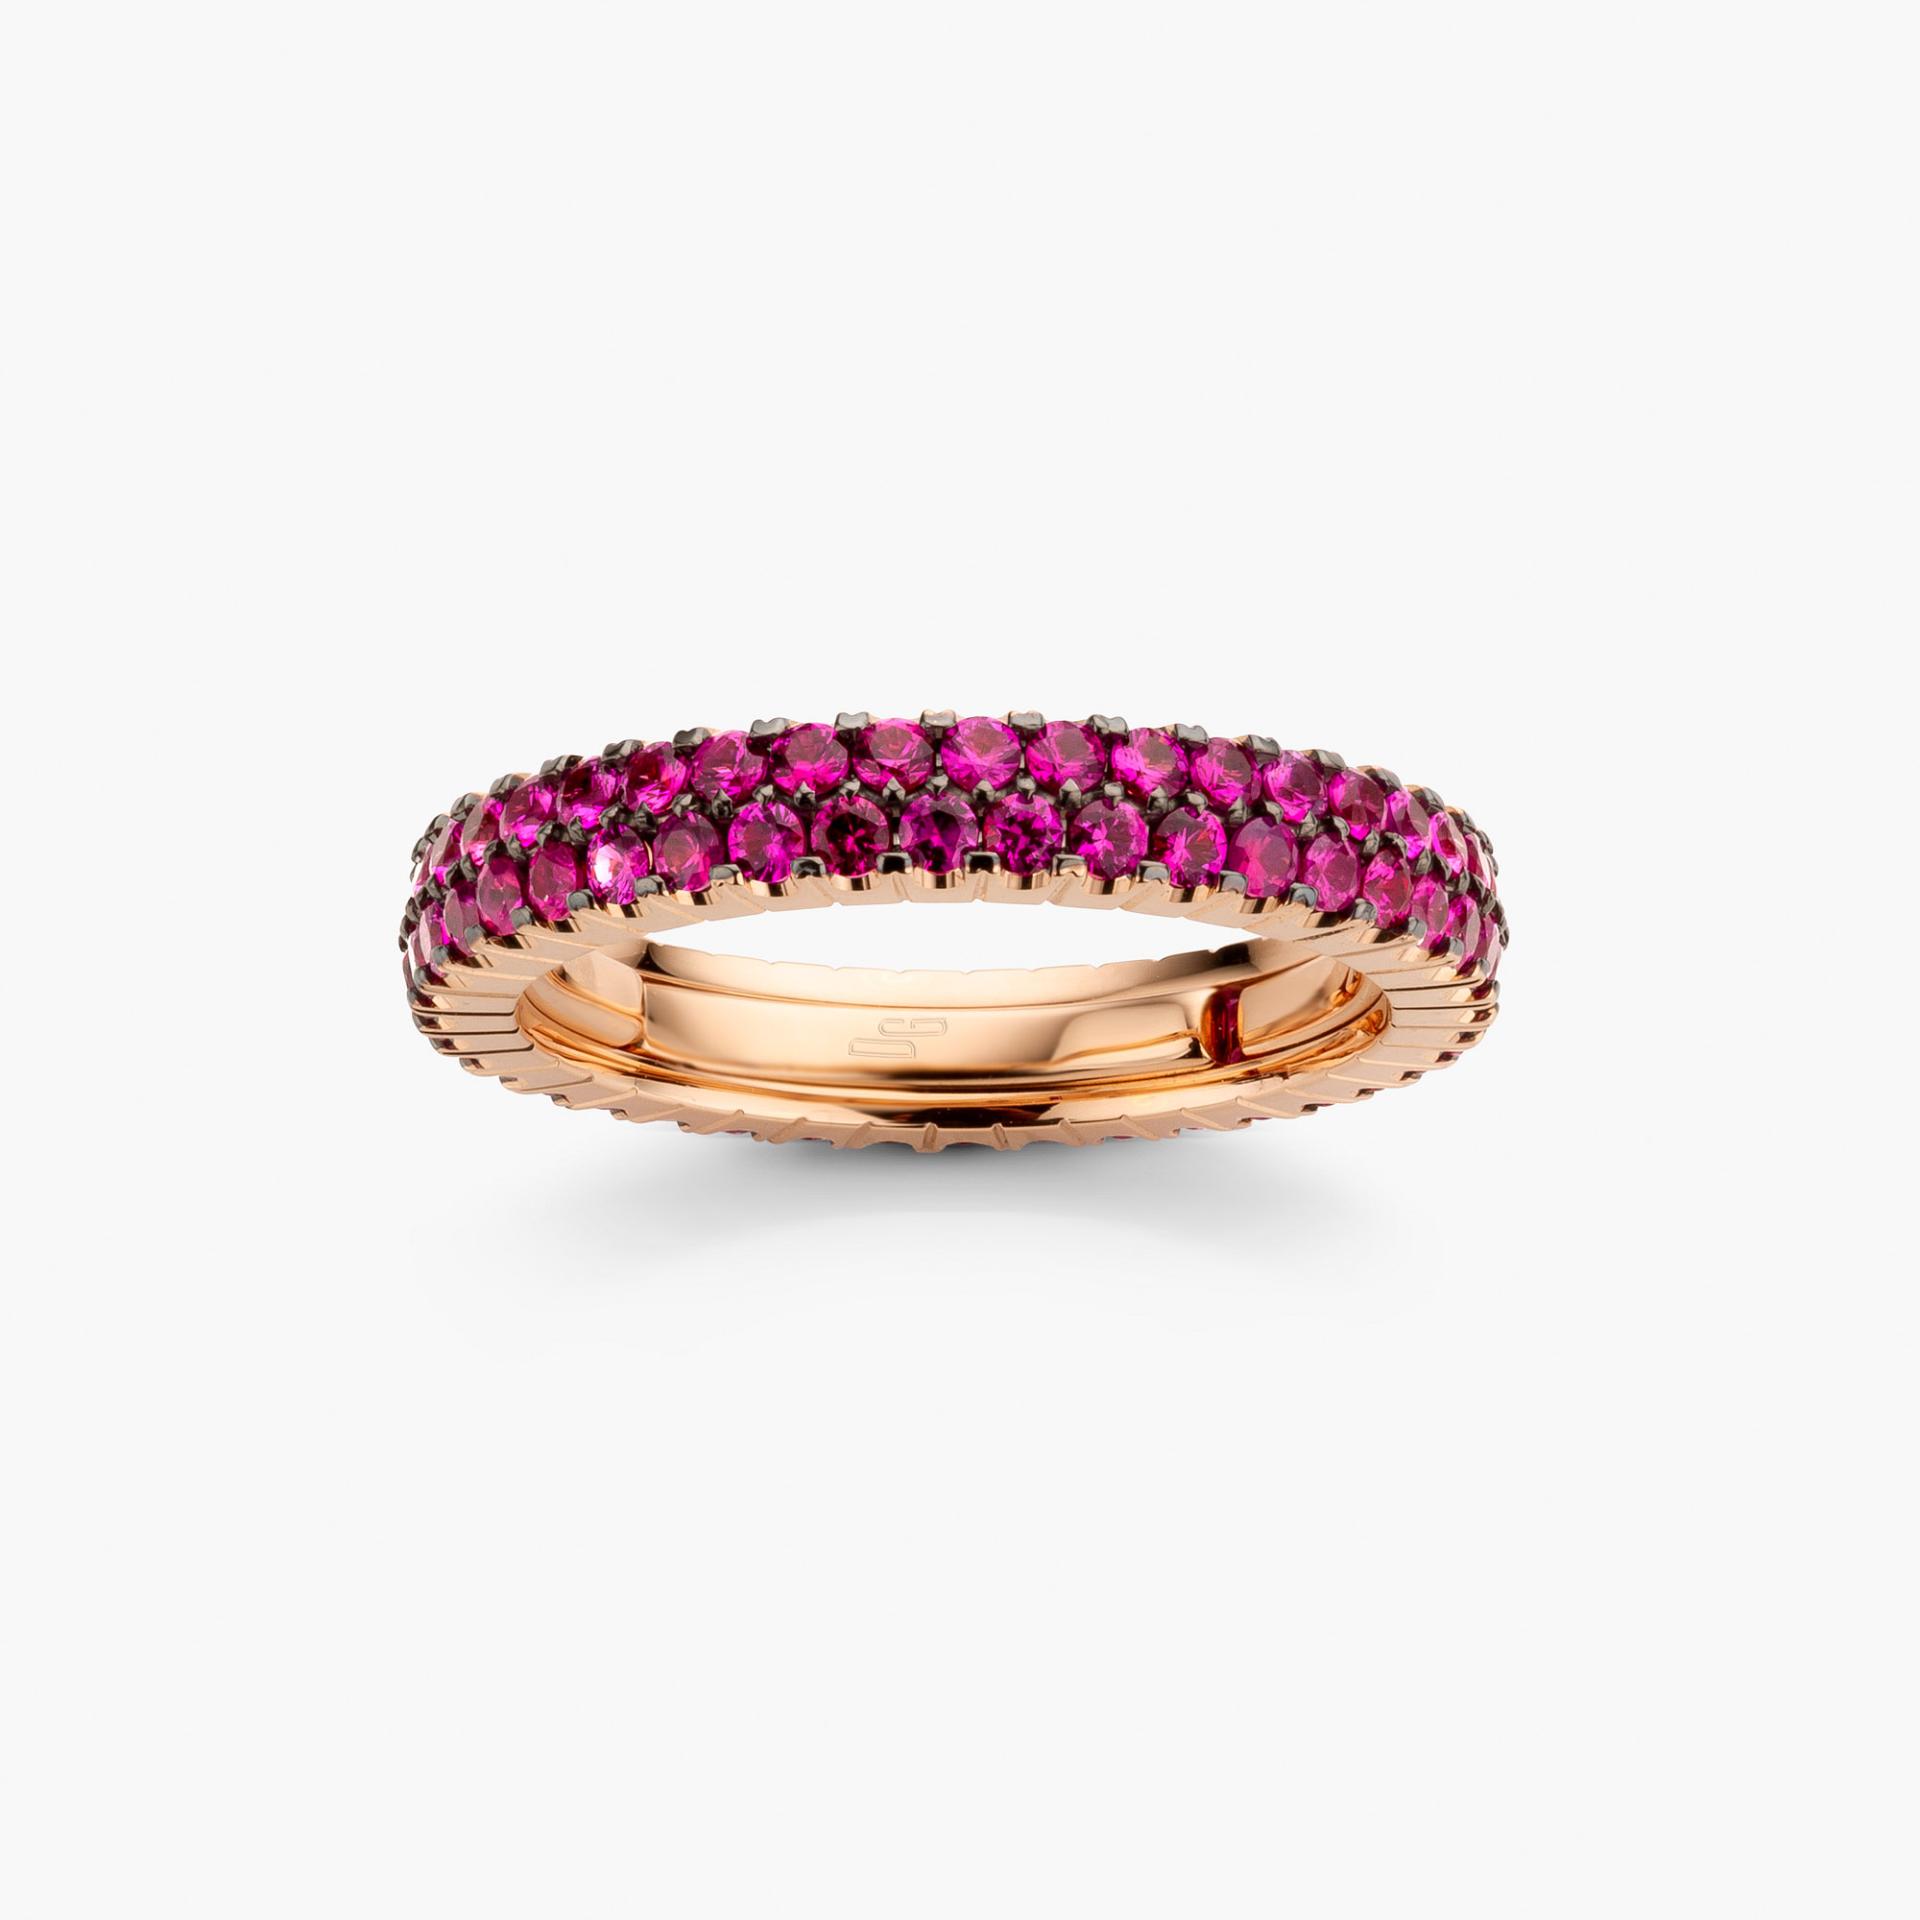 Rose gold ring Extensible set with rubies made by Demeglio